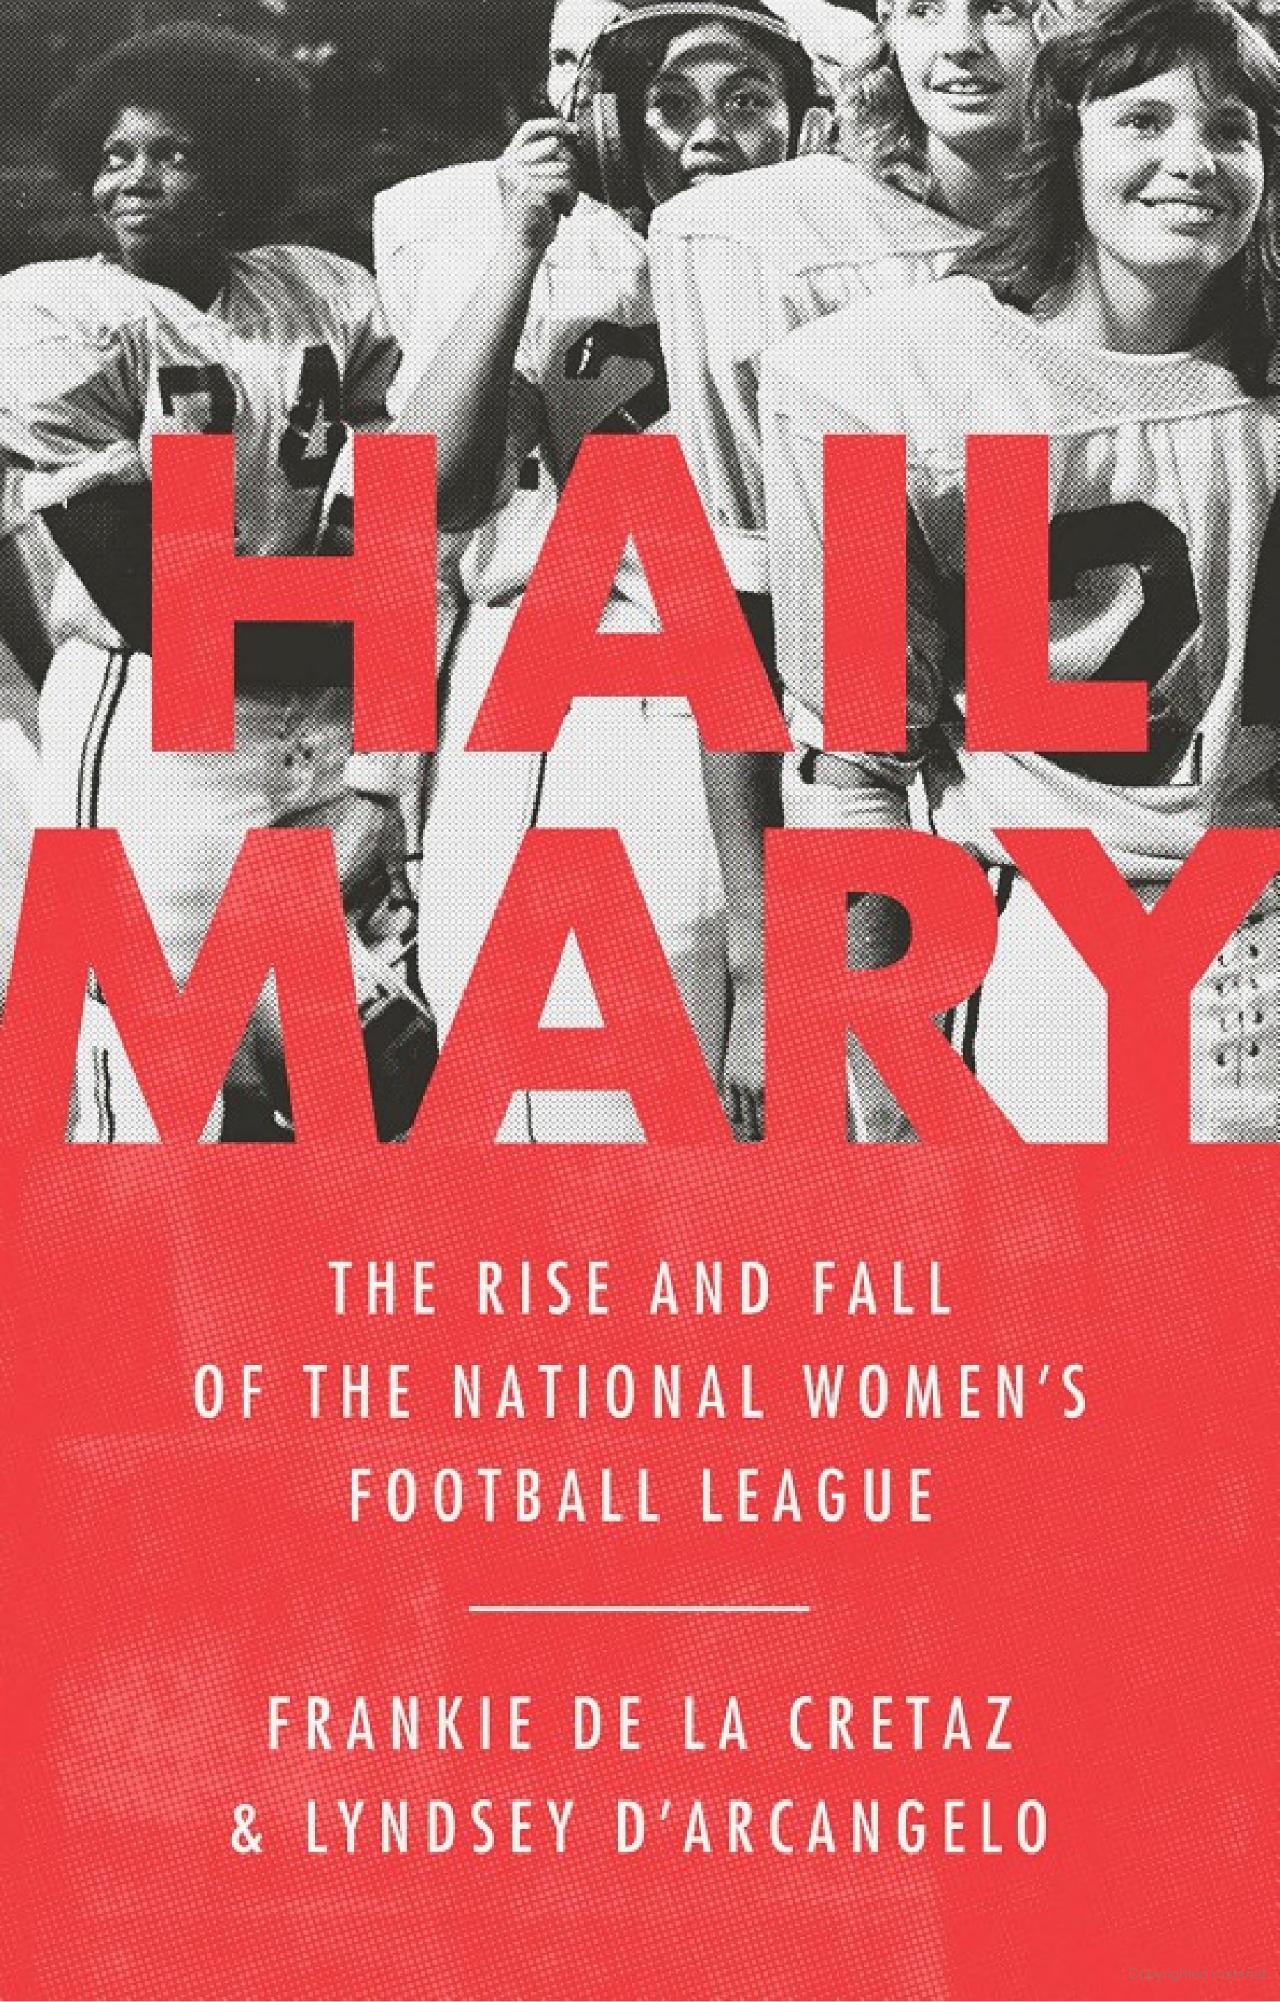 Black and white photo of women in football uniforms. The title Hail Mary is overlaid on the image in red text.